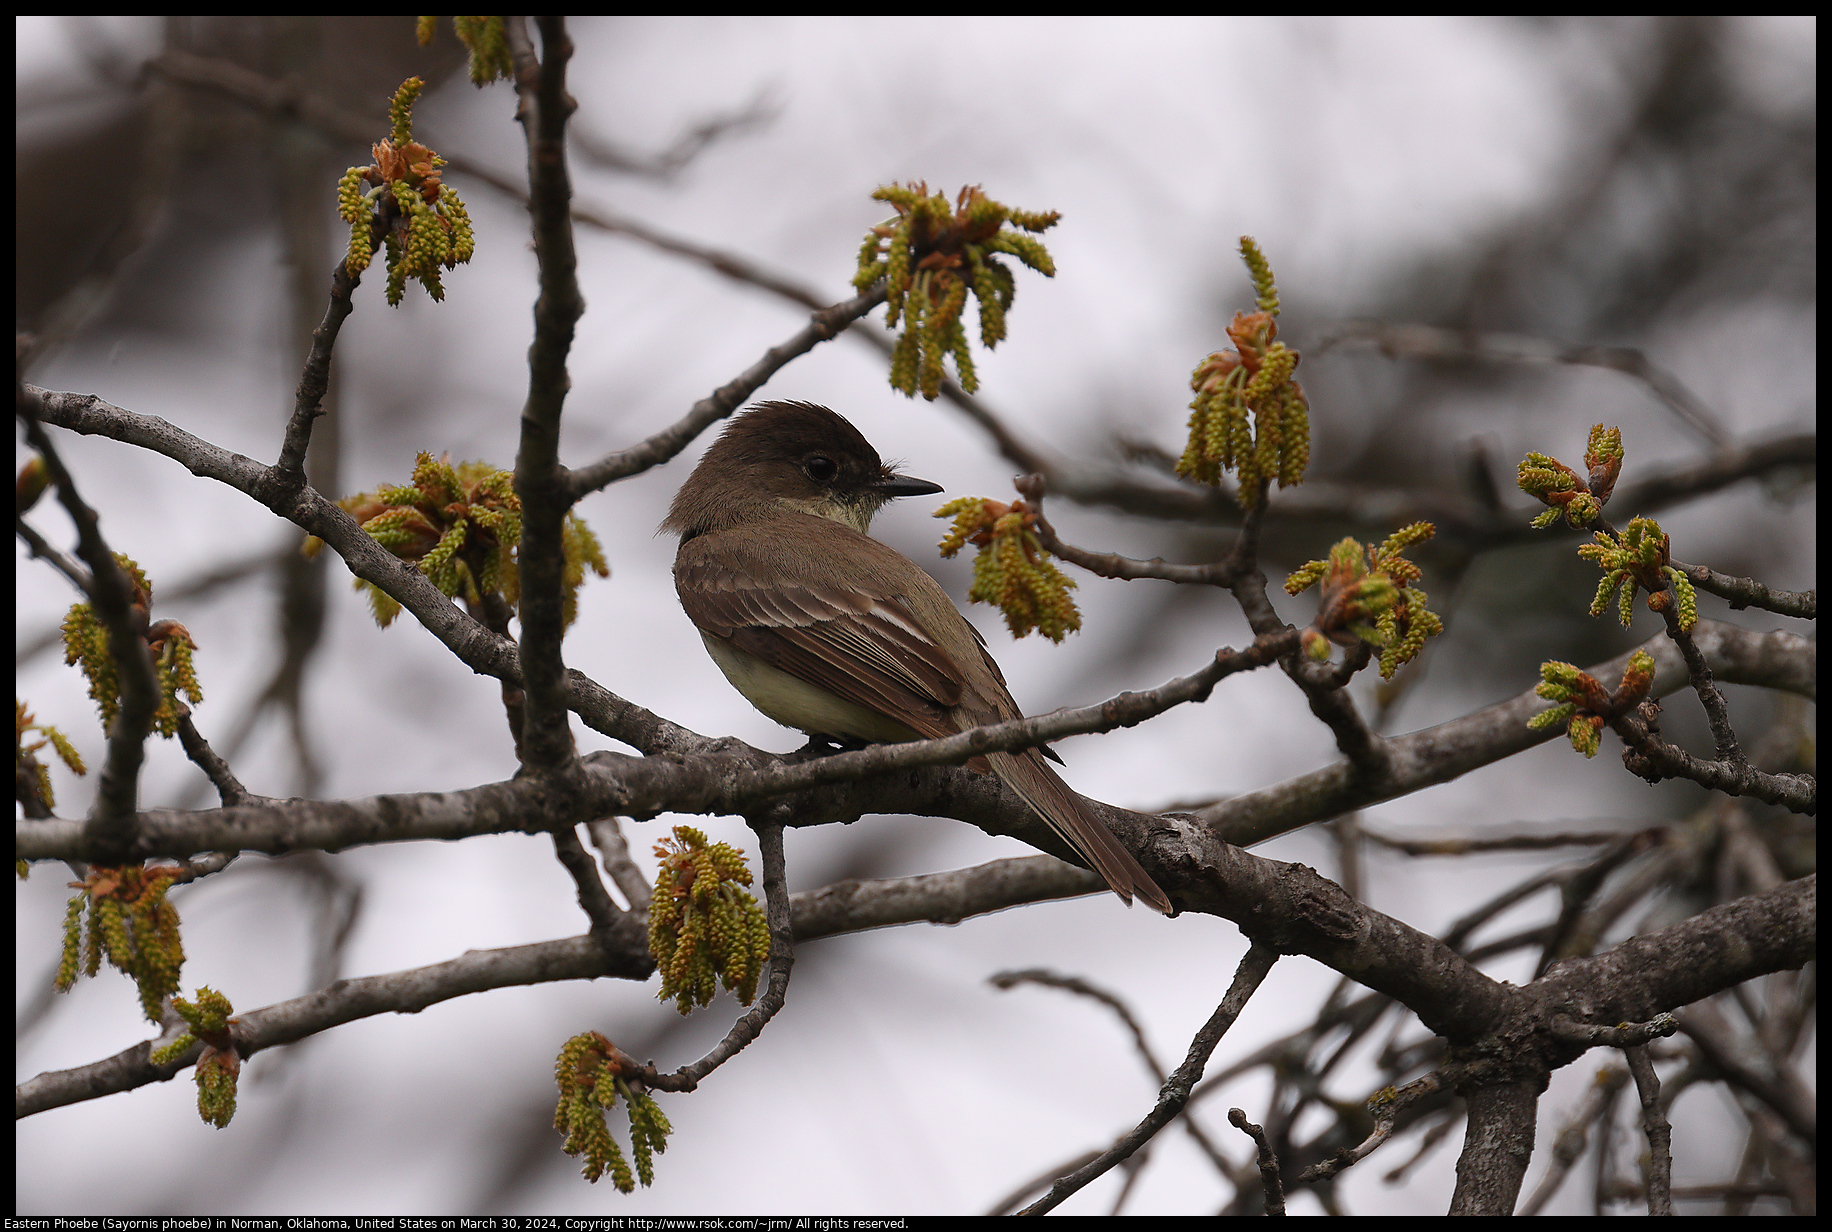 Eastern Phoebe (Sayornis phoebe) in Norman, Oklahoma, United States on March 30, 2024